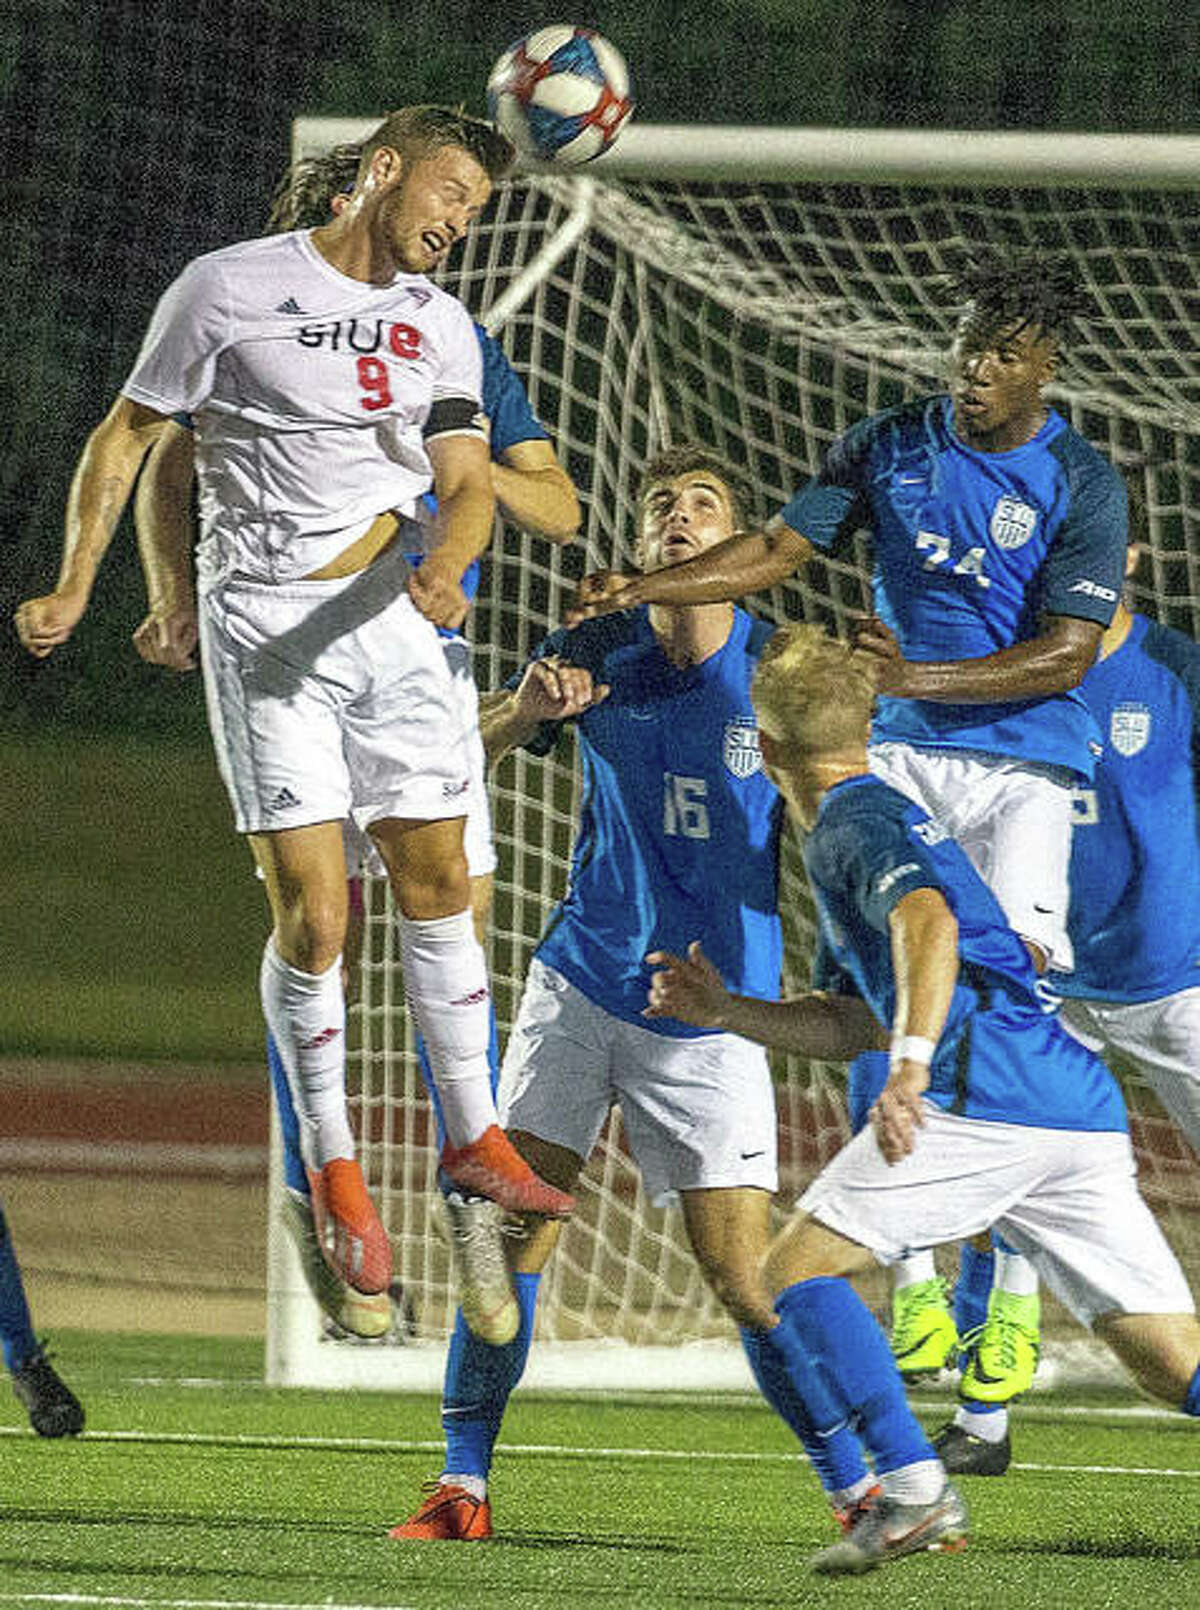 Former SIUE player Lachlan McLean (9) heads the ball during last season’s Bronze Boot game against Saint Louis University in at Korte Stadium. Saint Louis U. won in double overtime, 2-1. This year’s Bronze Boot game scheduled for Wednesday, was postponed because of weather.